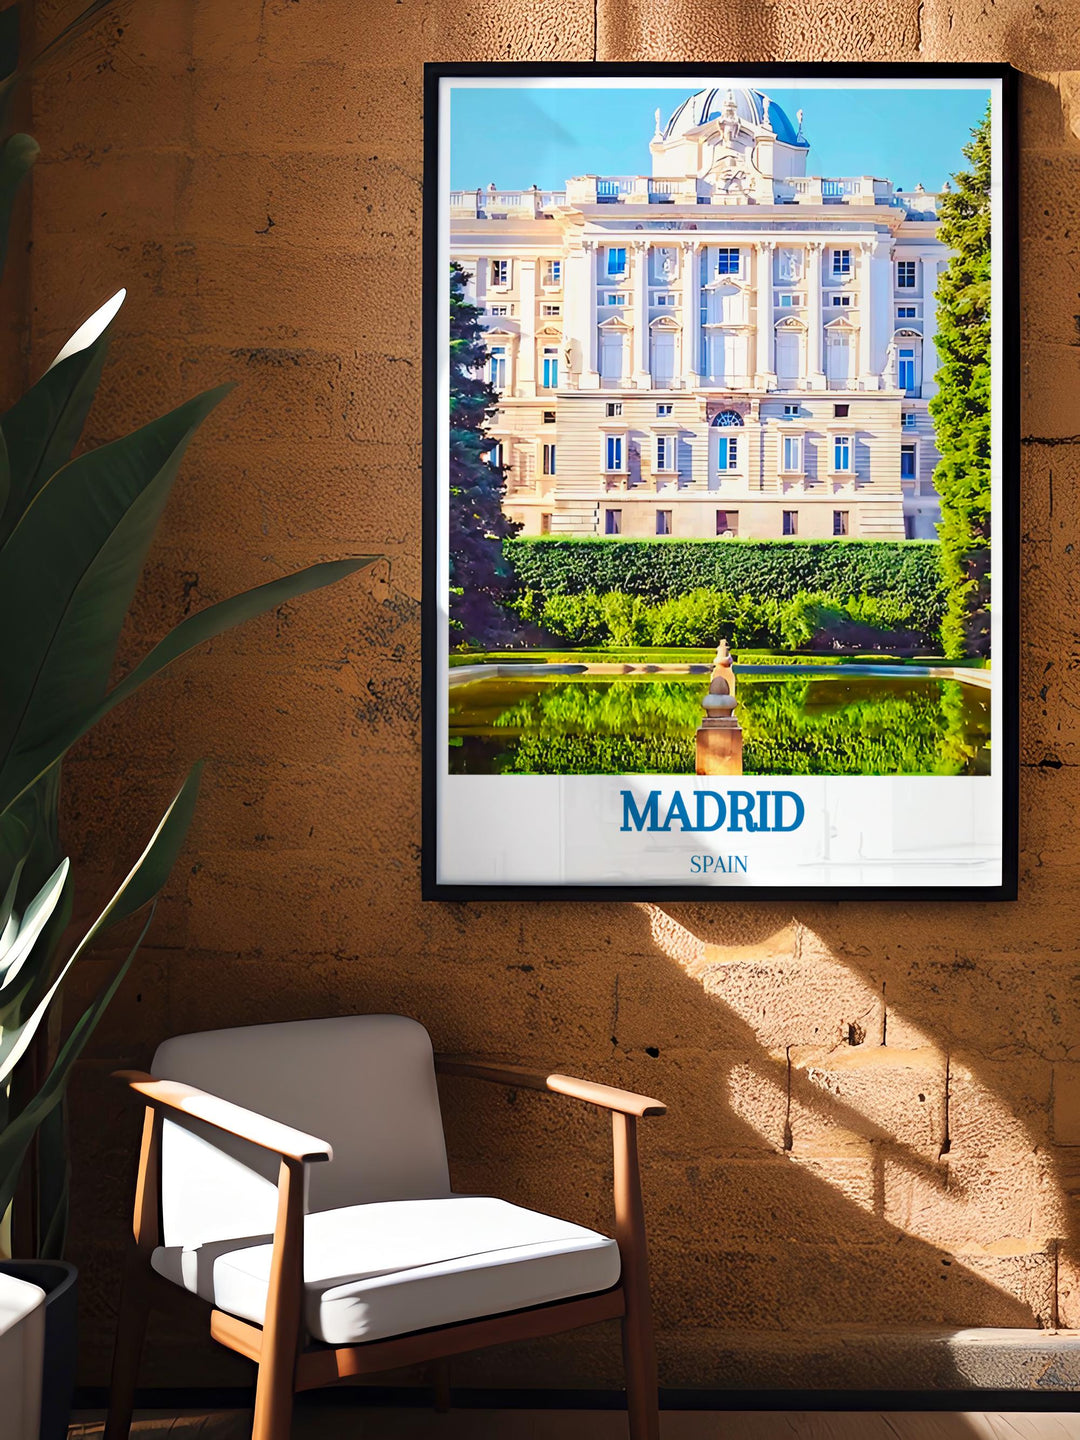 Spain travel poster with a vintage look, featuring major cities and attractions for the travel enthusiast.